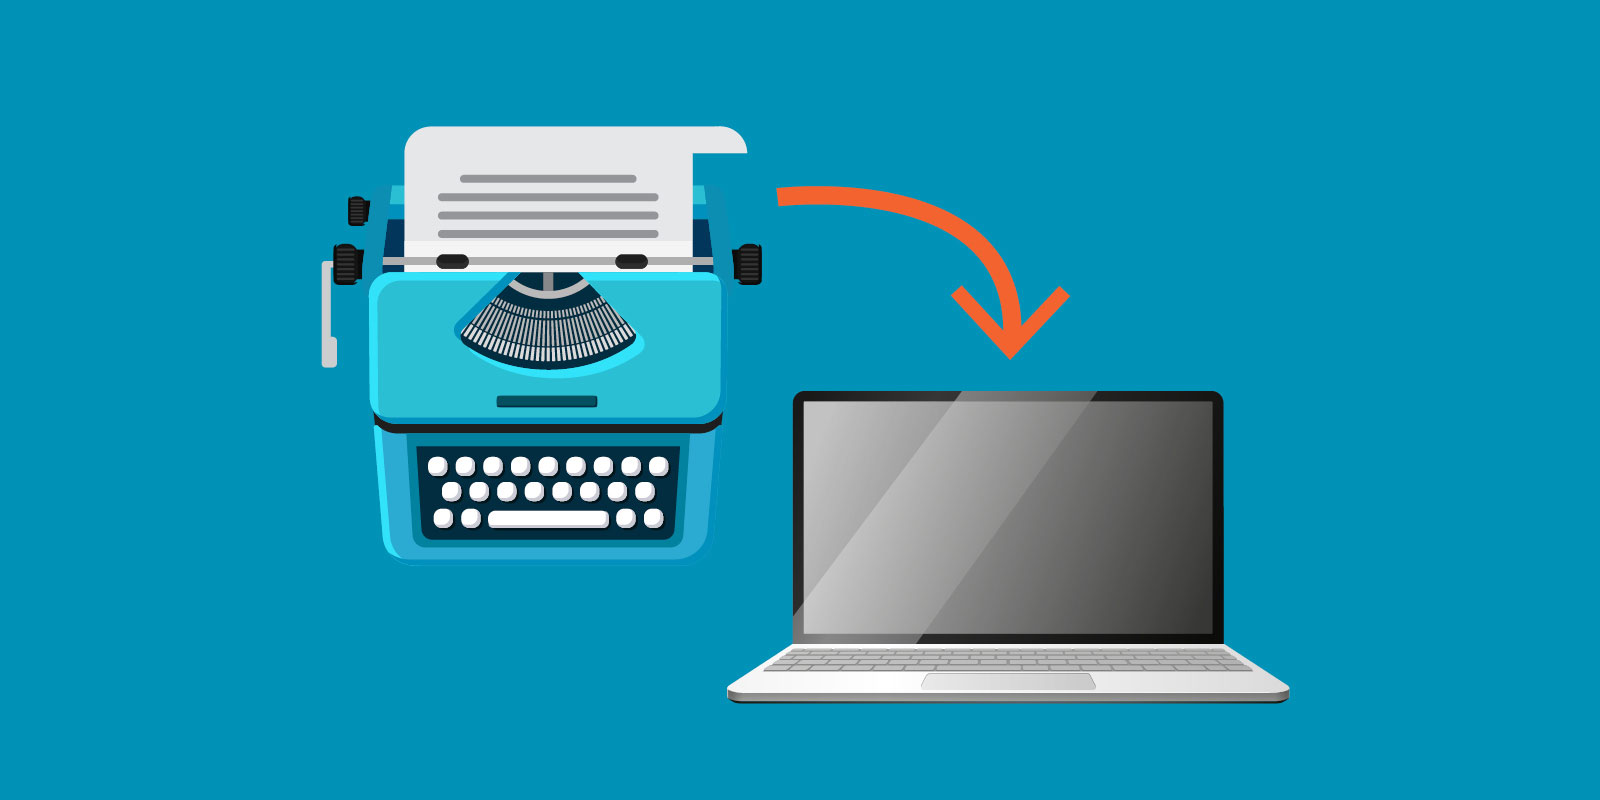 typewriter, arrow pointing to 90s boxy computer, arrow pointing to laptop displaying PDFs, arrow pointing to contemporary iMac with InfoTrack logo